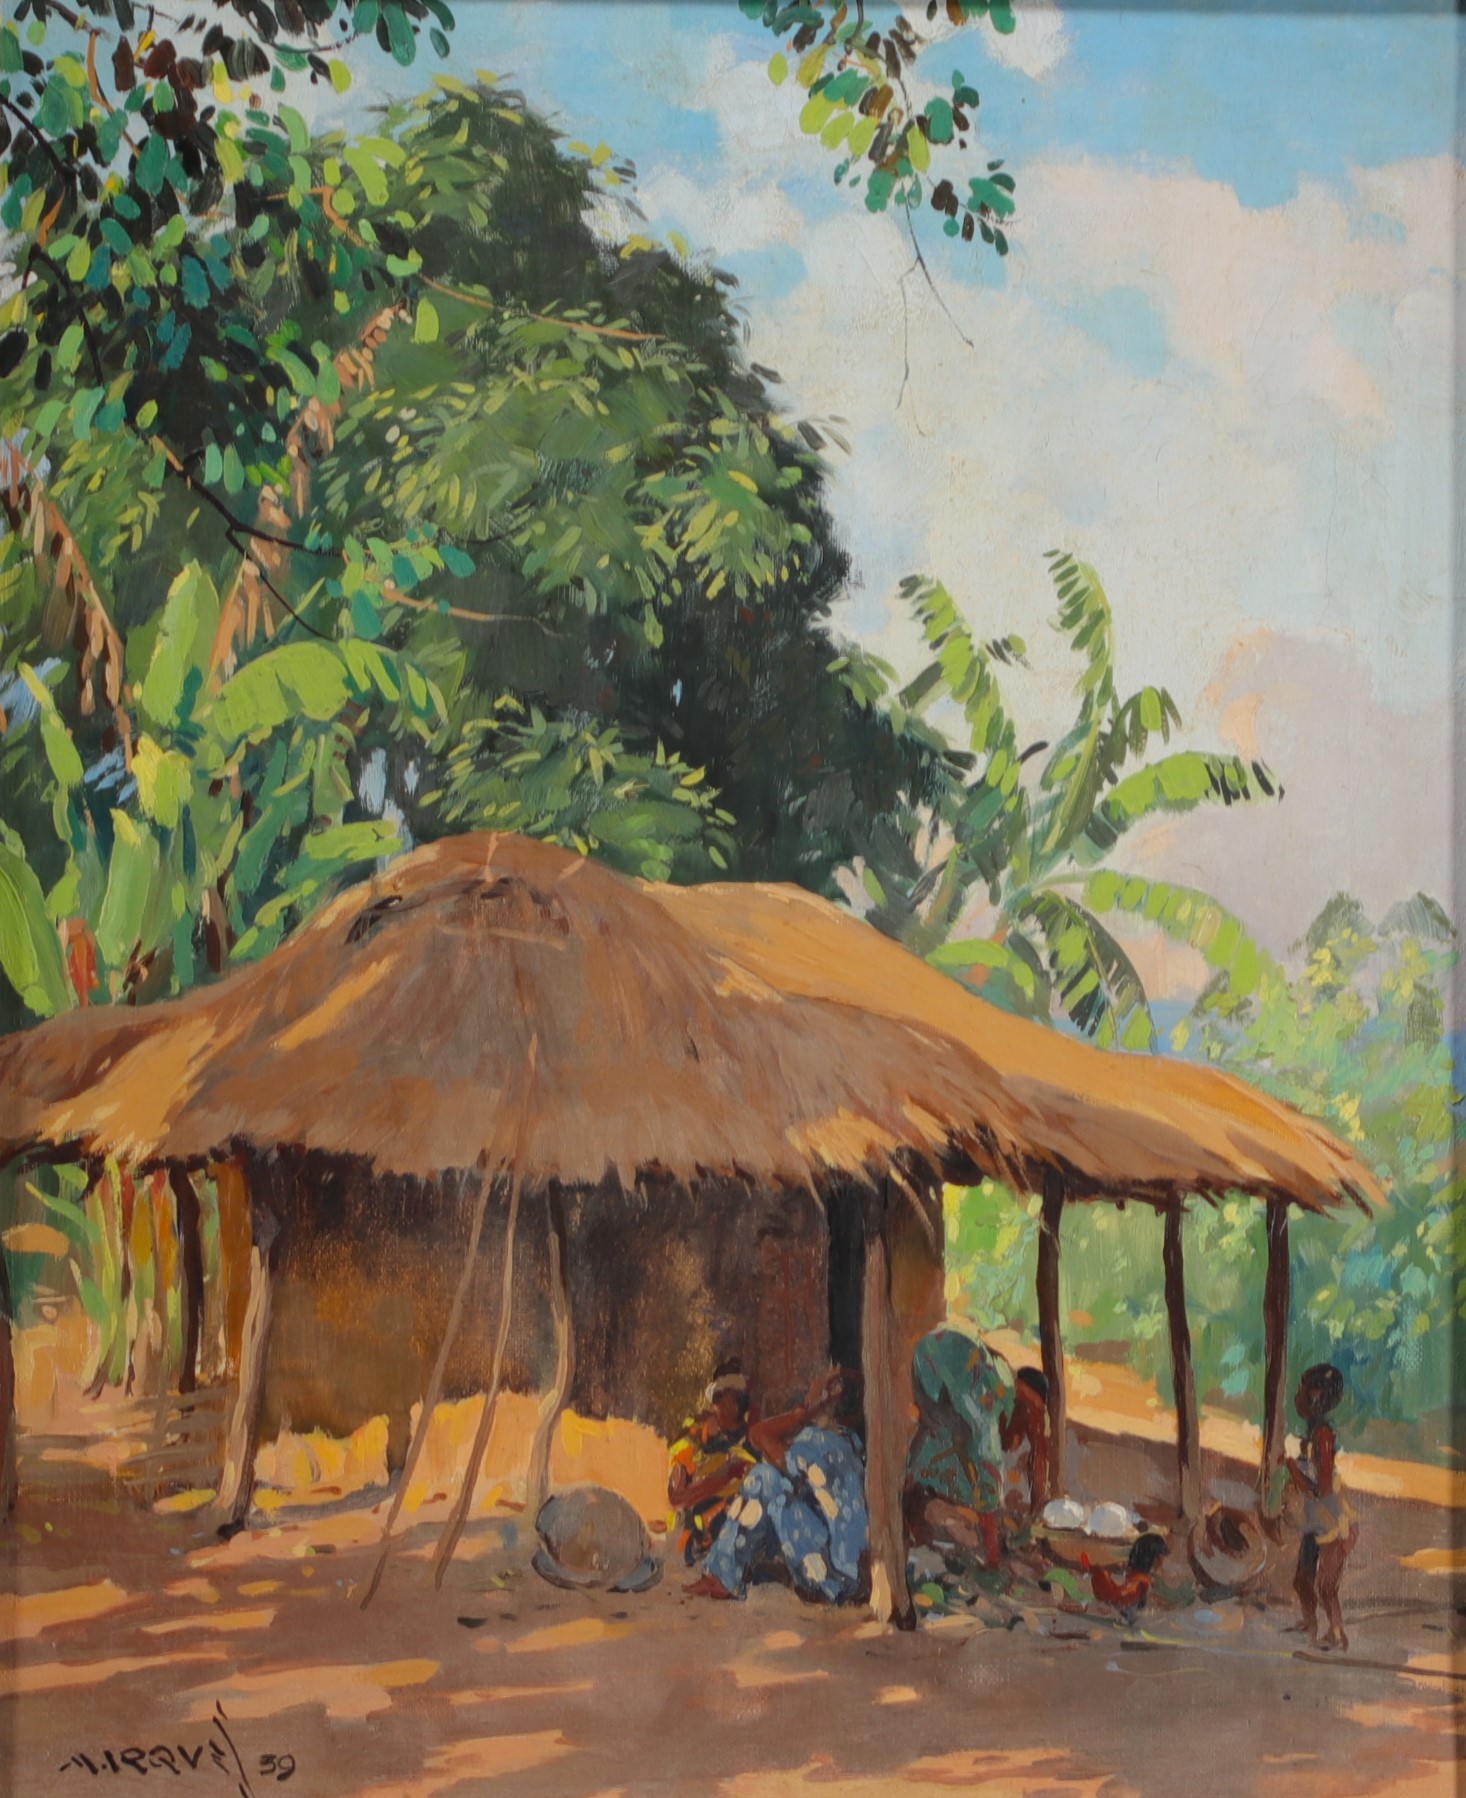 Guilherme MARQUES (1887-1960) "African Village" Oil on canvas, signed and dated 1939.